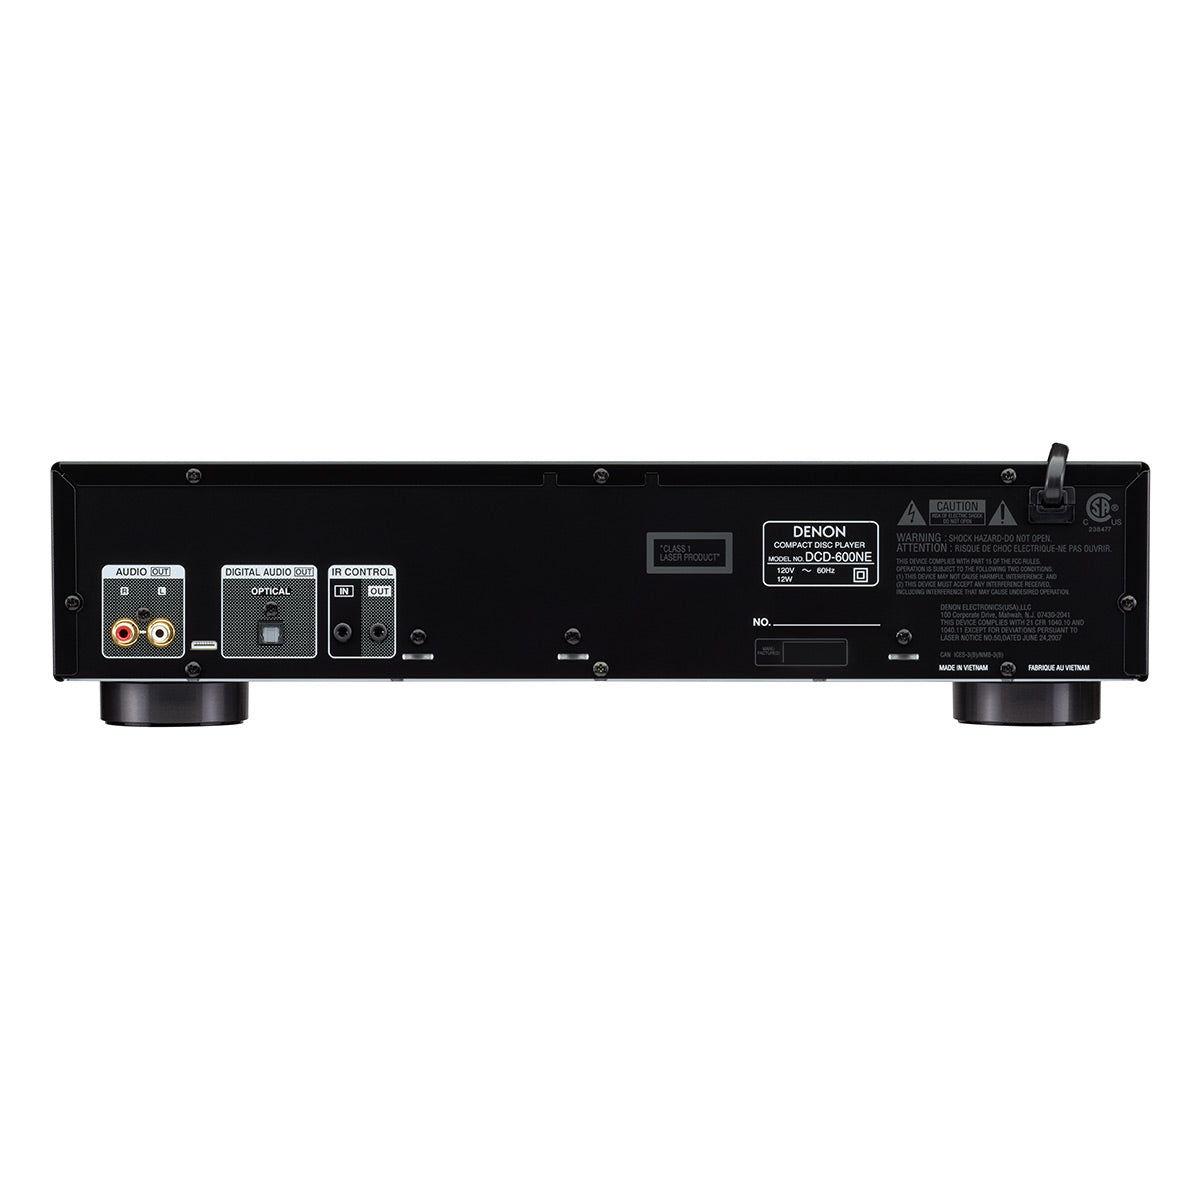 Denon DCD-600NE CD Player with PMA-600NE 2 Channel 70W Integrated Amplifier with Bluetooth